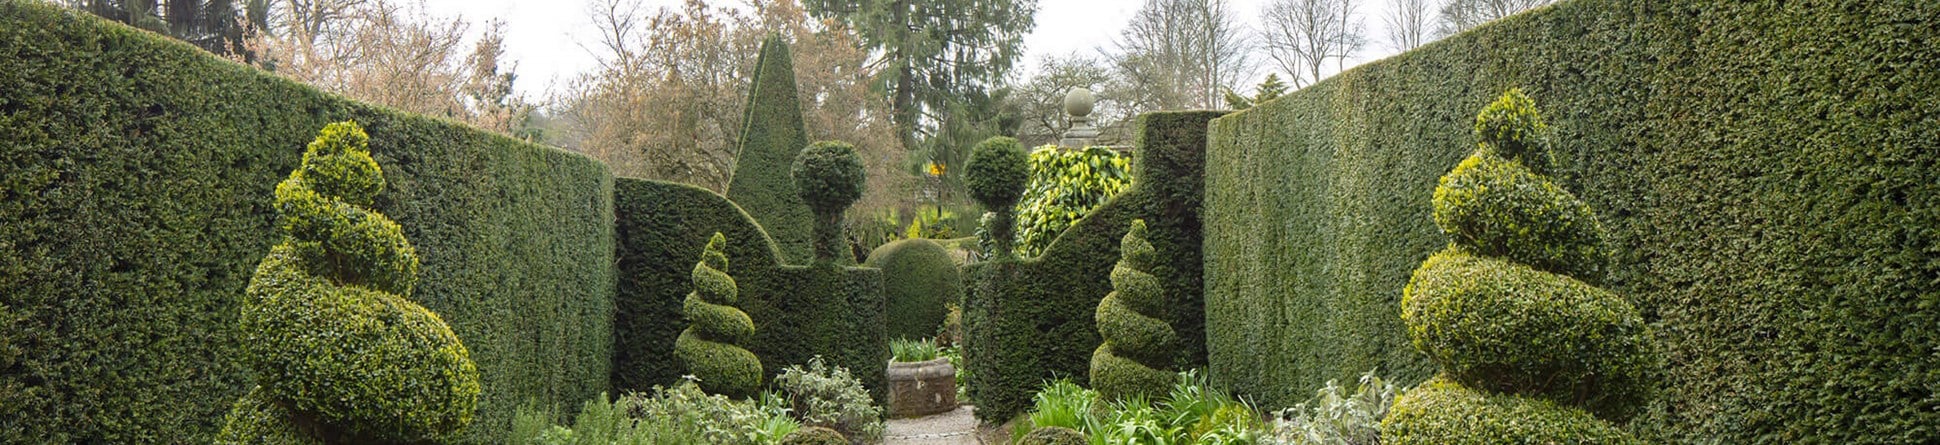 Topiary lining a path with hedging either side.